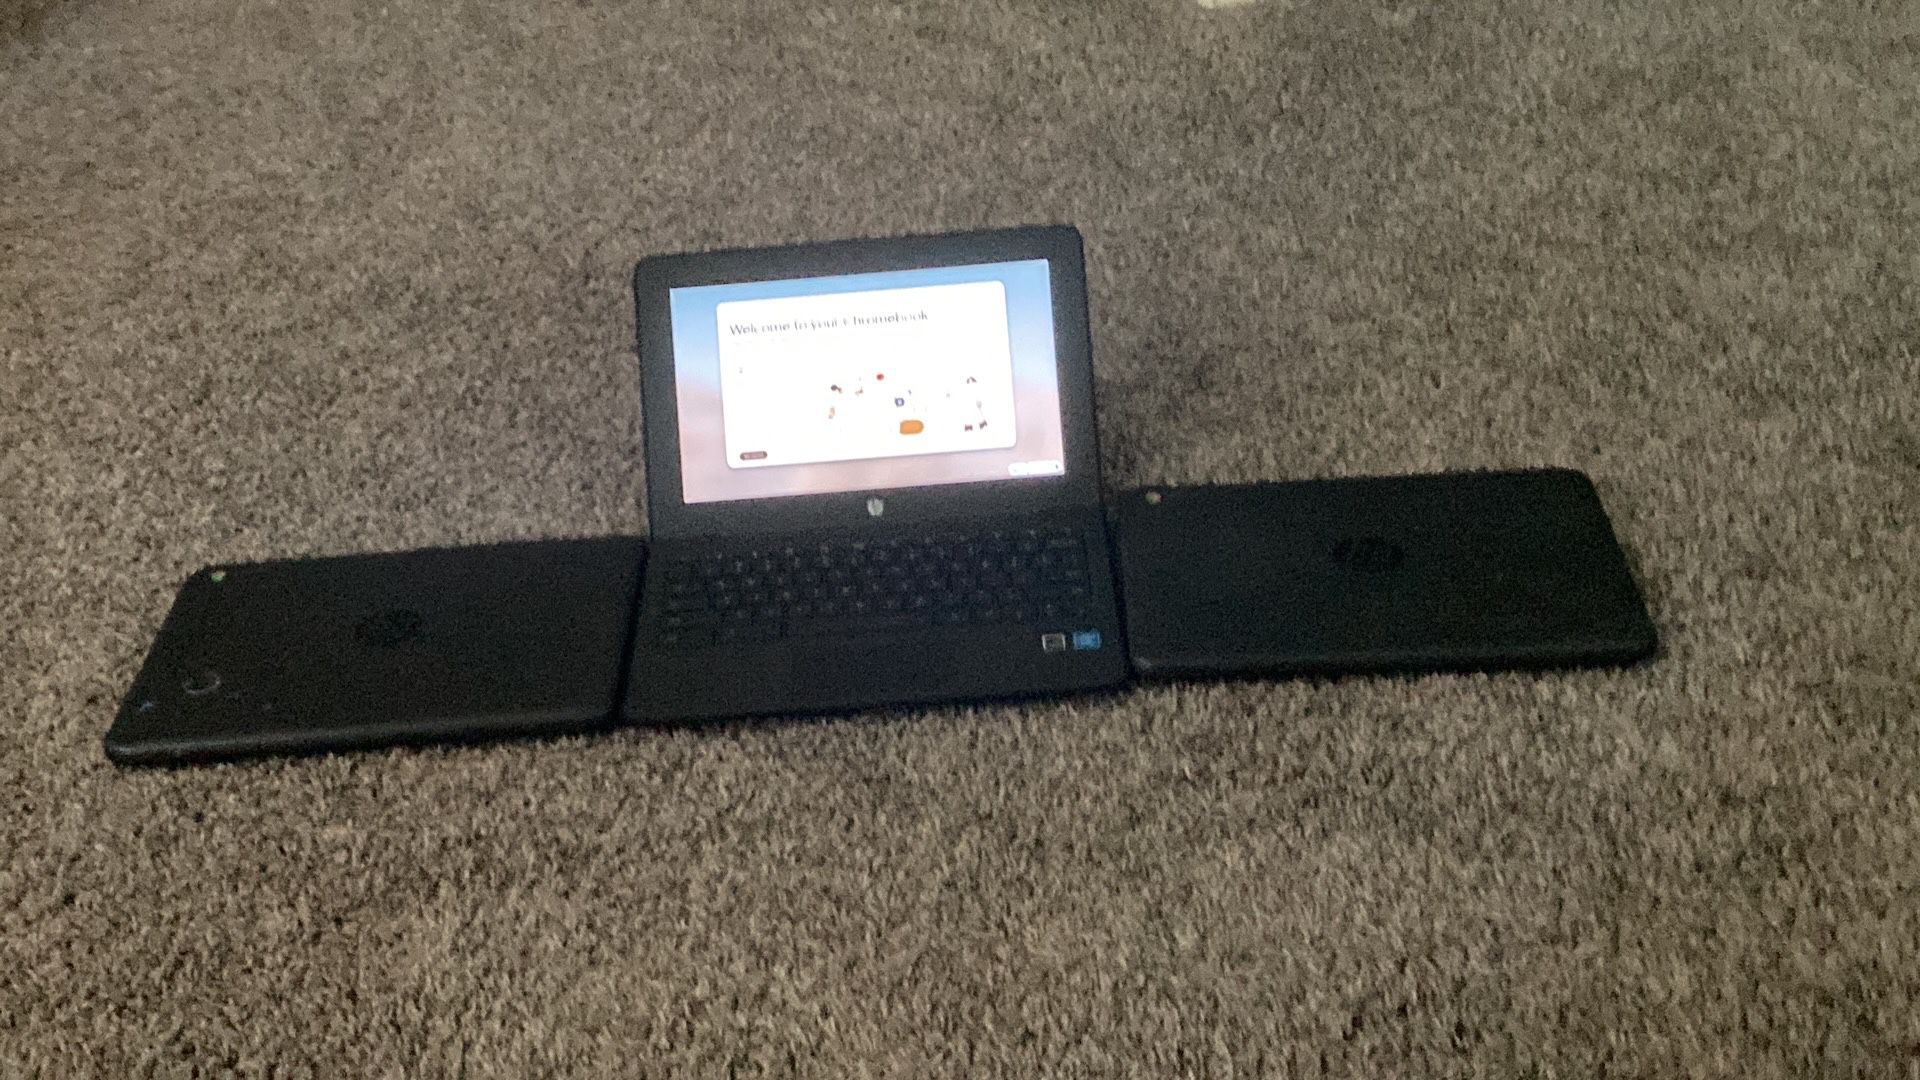 3 Hp Chromebooks (no charger)